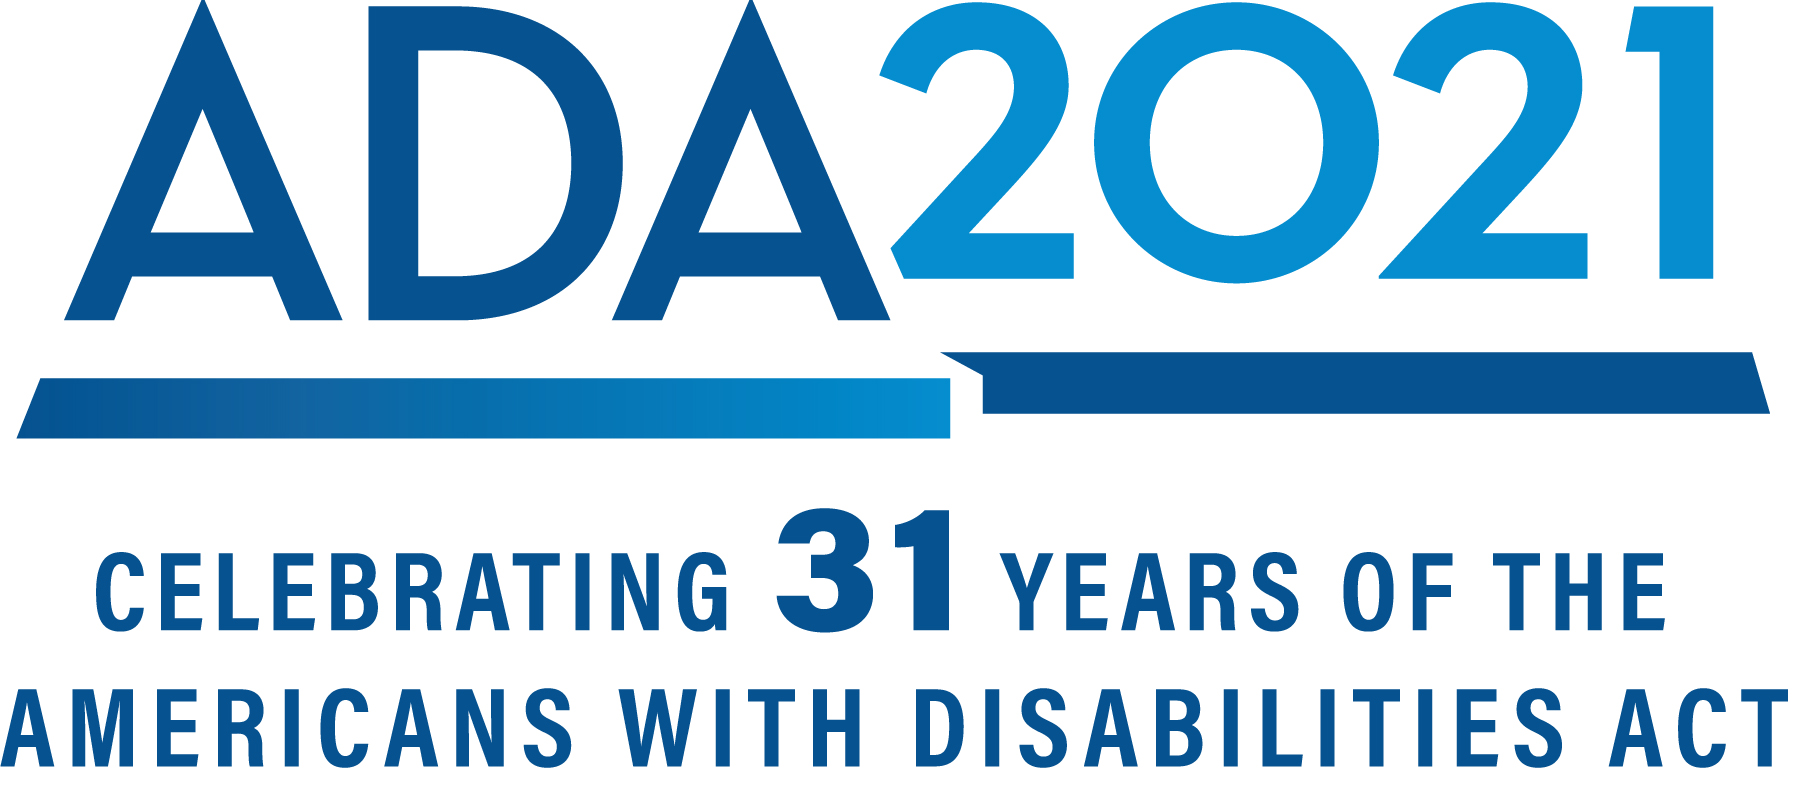 ADA 2021 Celebrating 31 years of the Americans with Disabilities Act logo